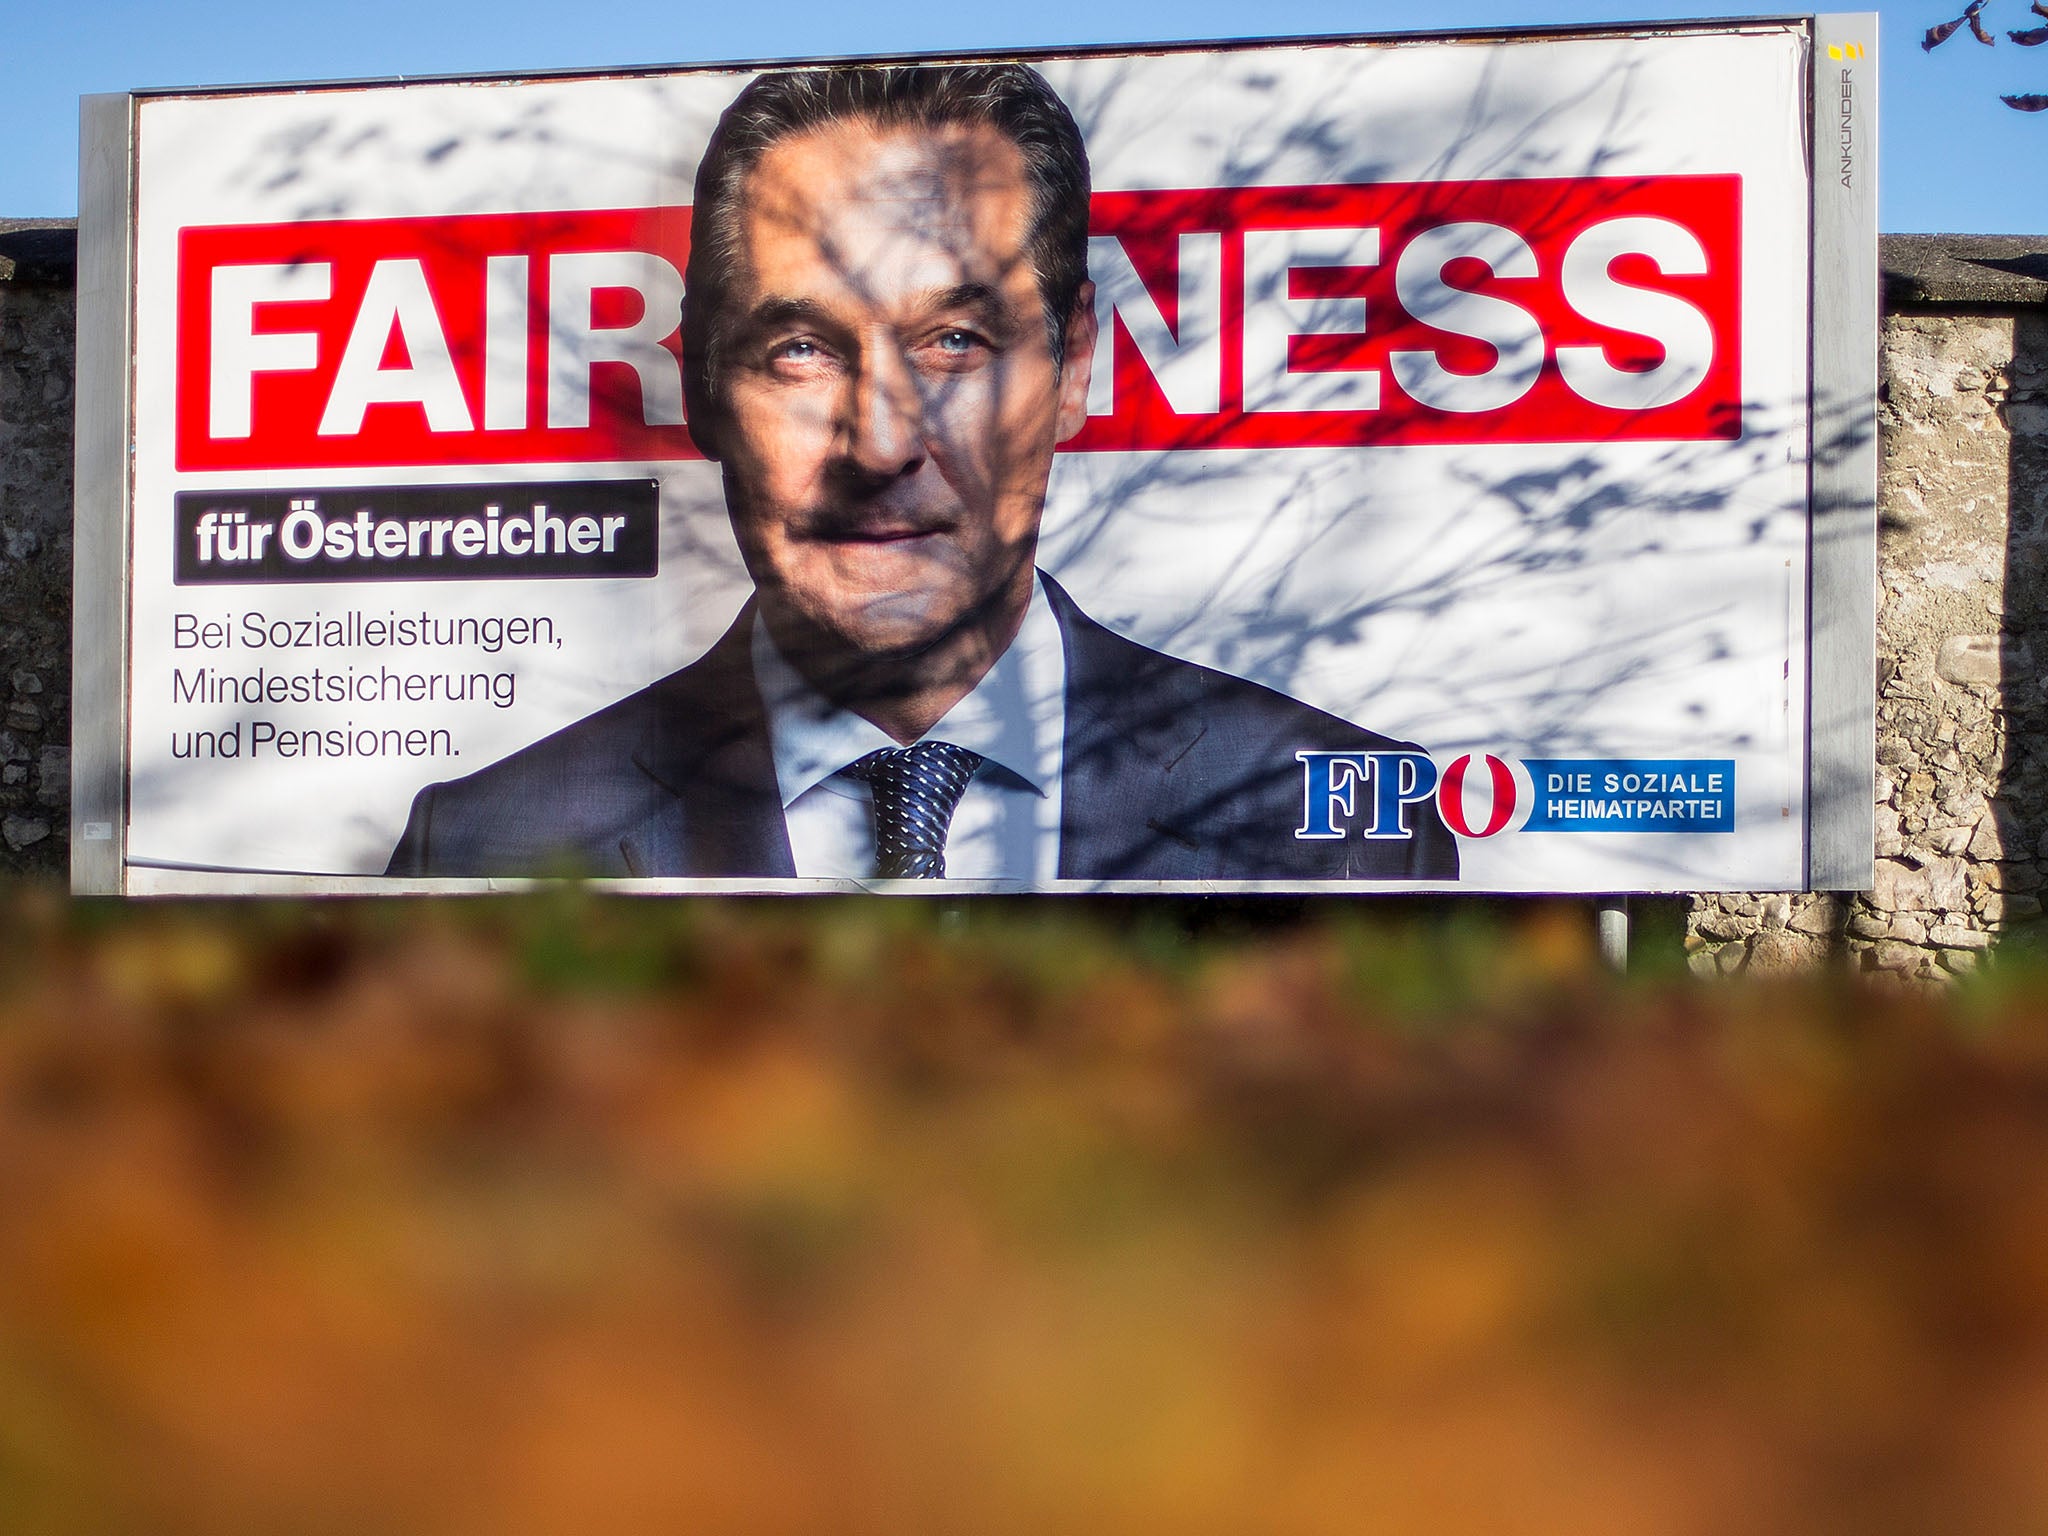 An election campaign poster shows far-right Freedom Party (FPO) leader Heinz-Christian Strache